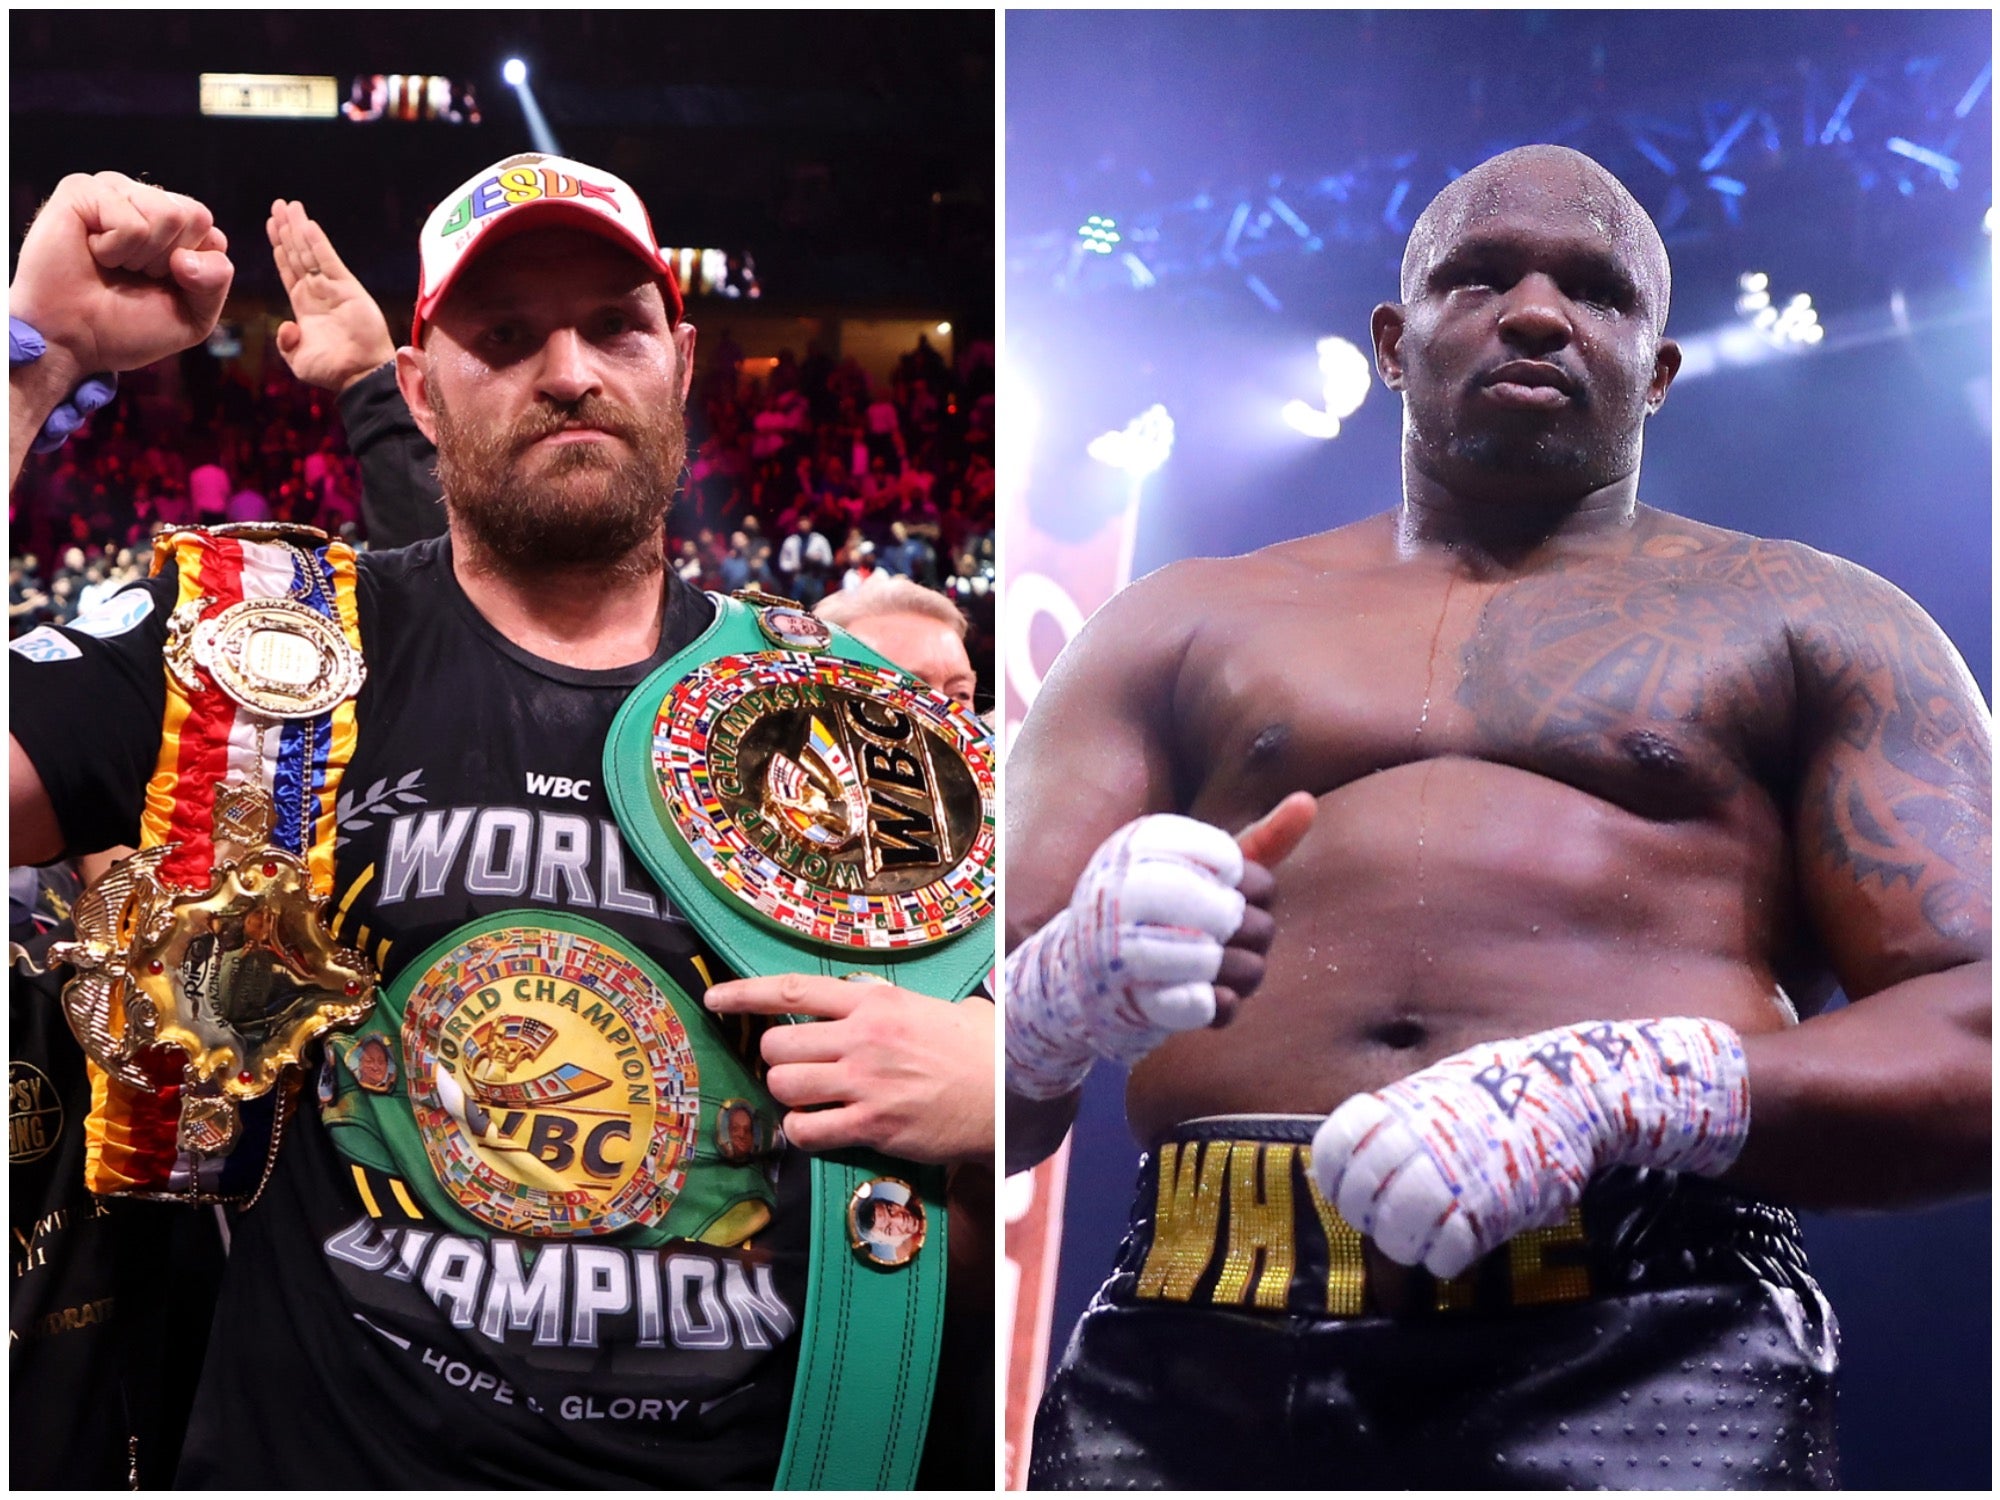 Tyson Fury has been ordered to defend his WBC heavyweight title against Dillian Whyte